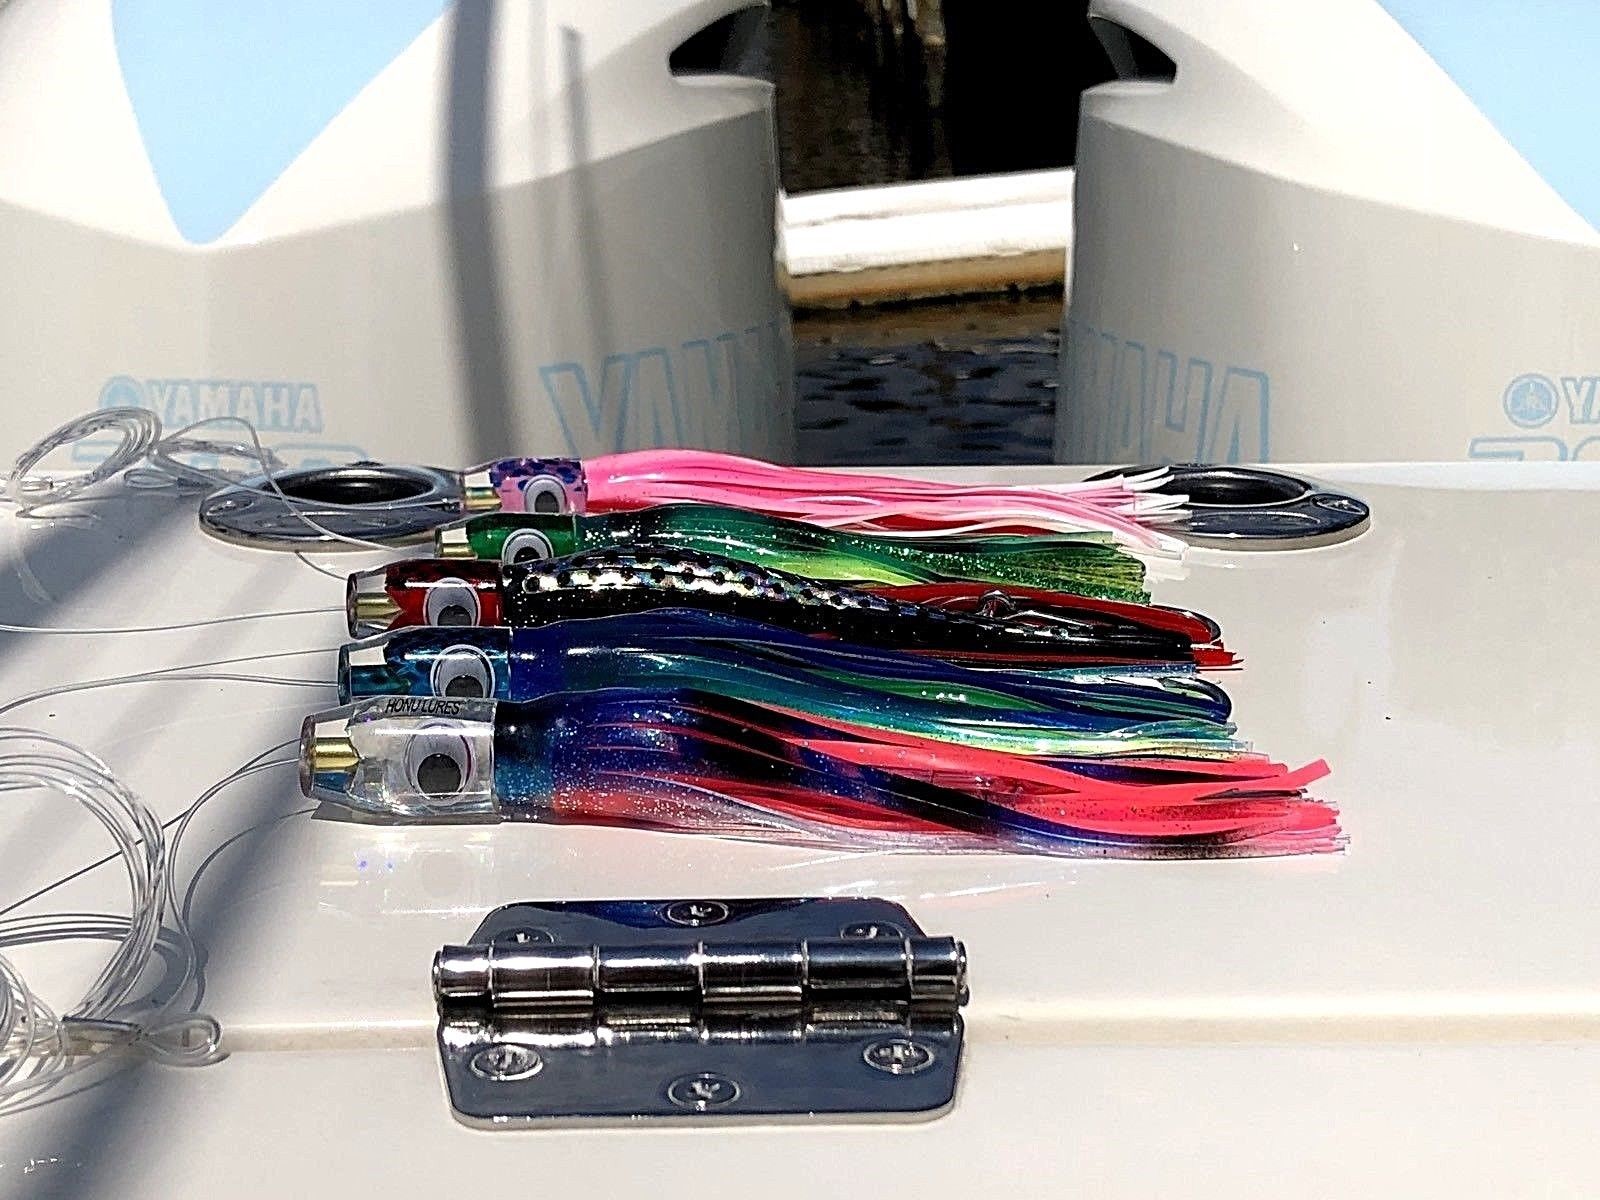 6 Ways to Troll Slow With Your Boat | Sport Fishing Mag